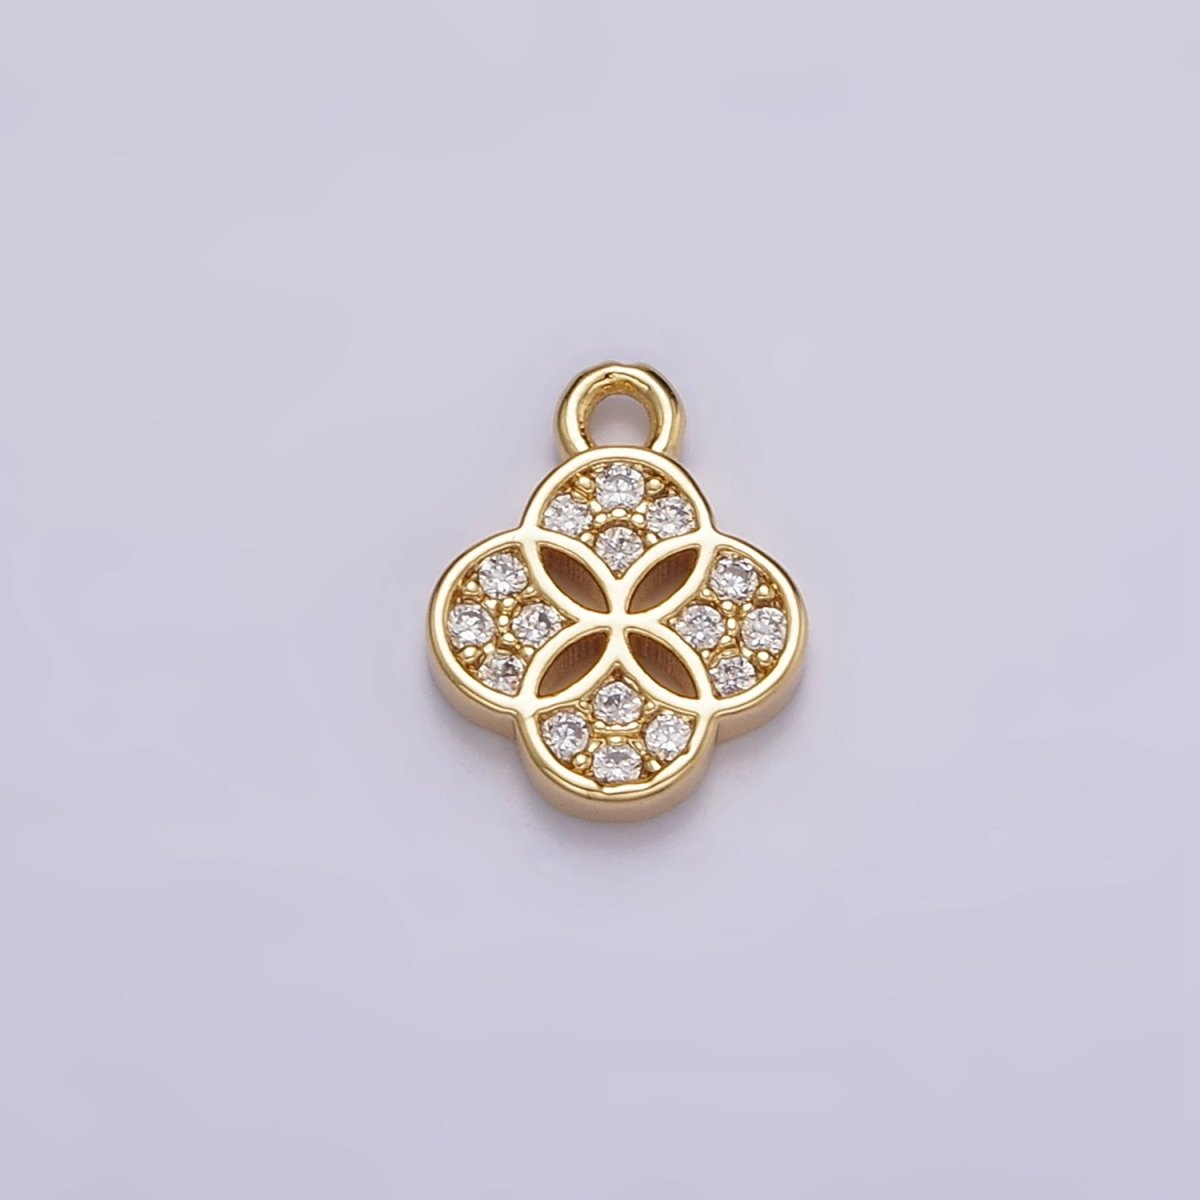 16K Gold Filled Mini Clear Micro Paved Quatrefoil Clover Flower Open Add-On Charm | N968 - DLUXCA